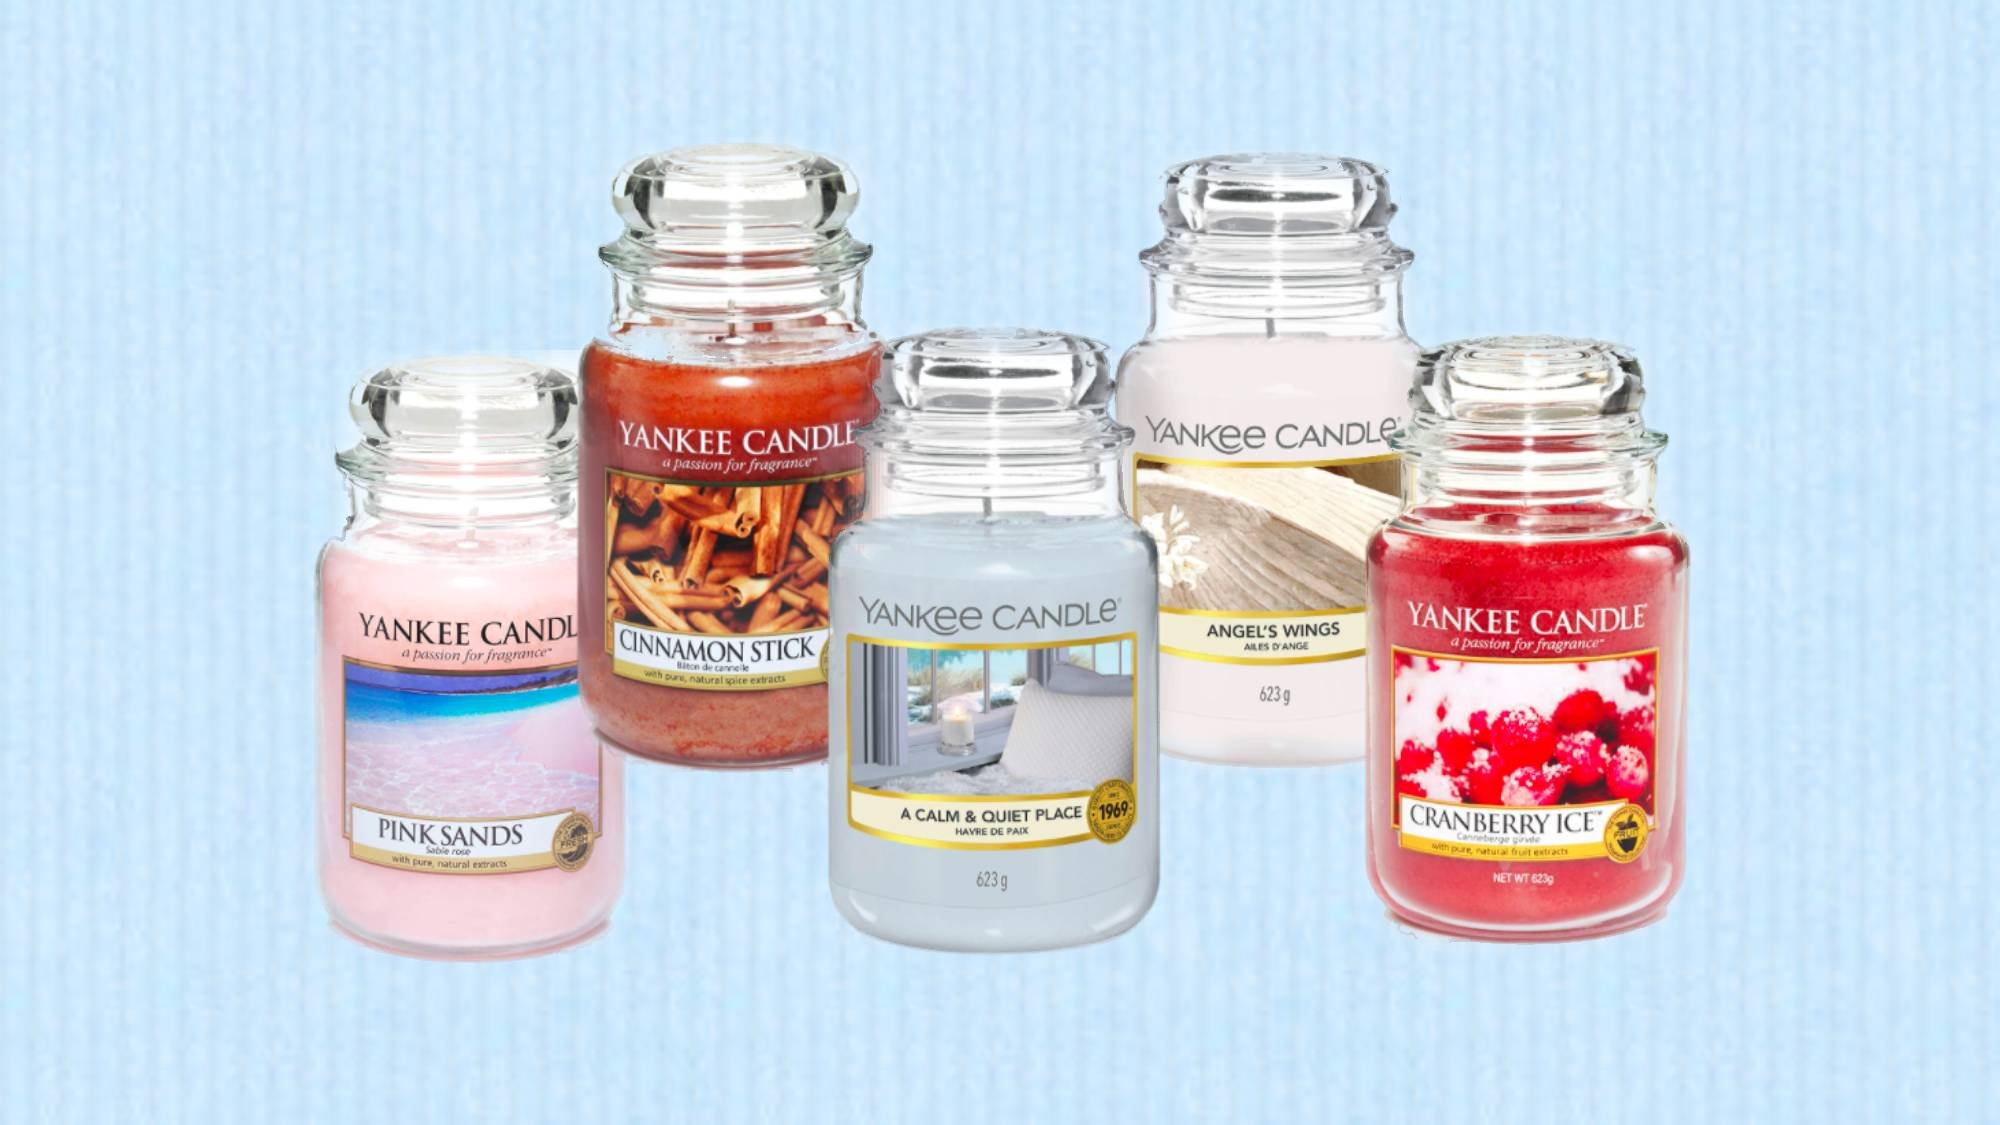 These Yankee Candle Prime Day deals have my house smelling *dreamy*